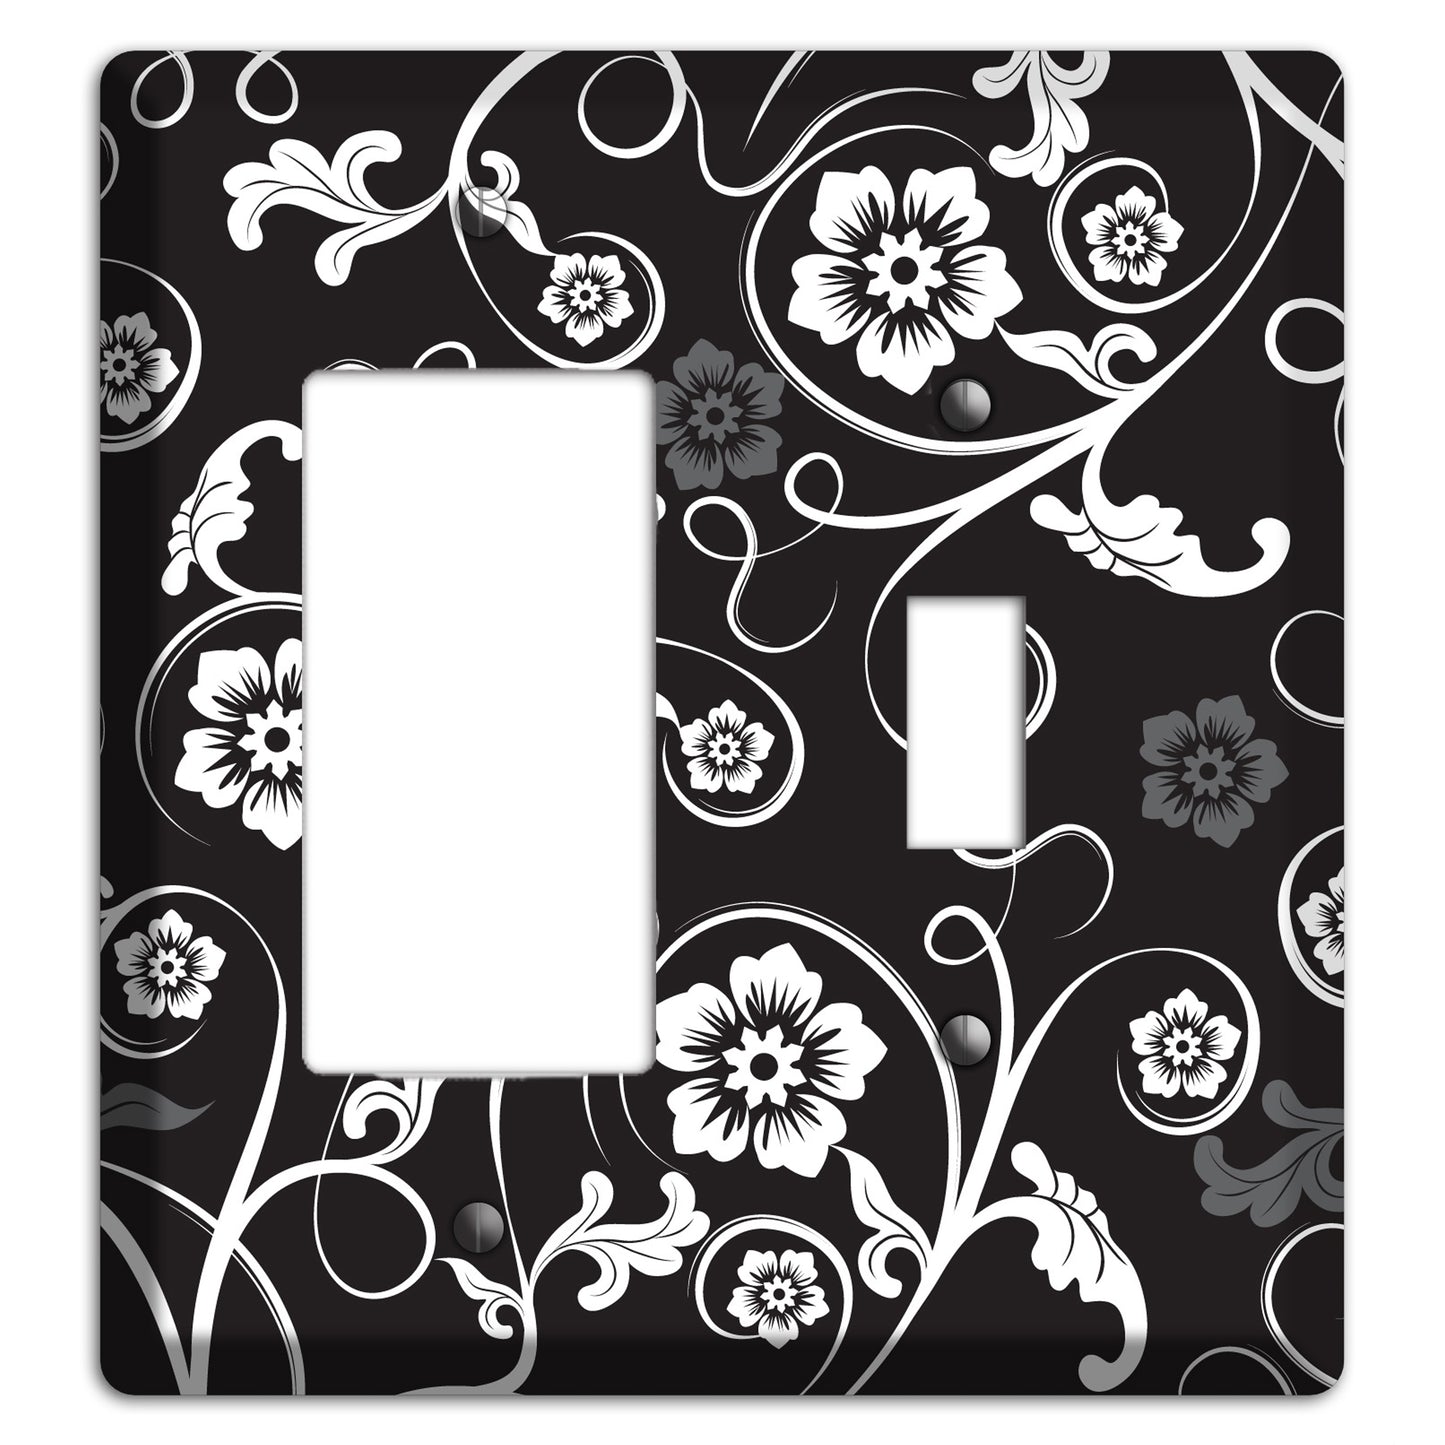 Black with White Flower Sprig Rocker / Toggle Wallplate